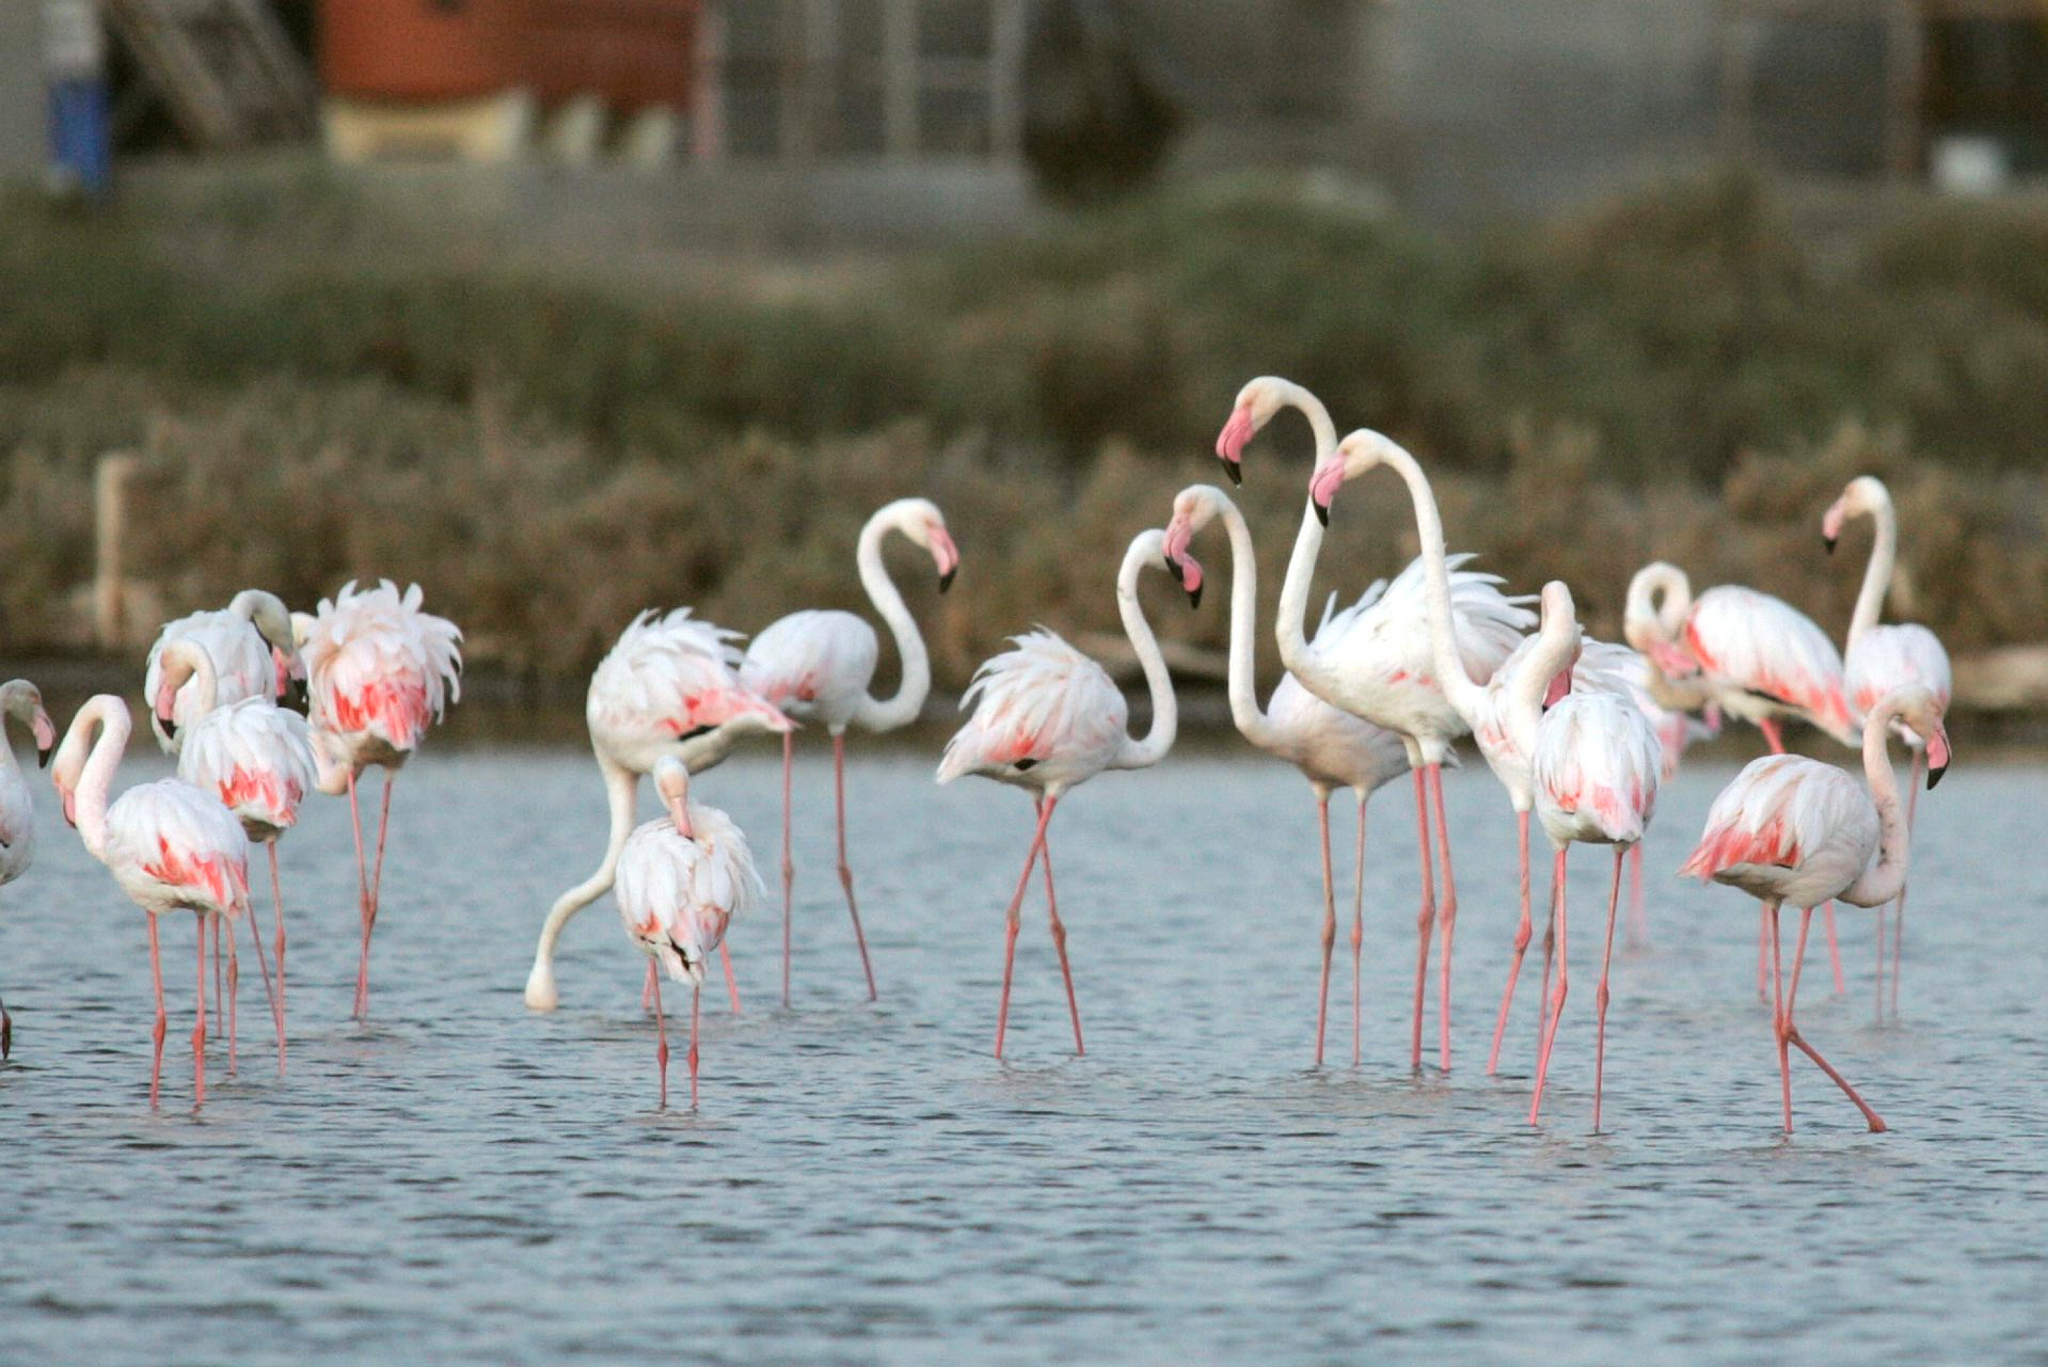 A flock of about 100 Flamingos wintering at the salt ponds of Atlit near Haifa. Photo by Yossi zamir/Flash 90